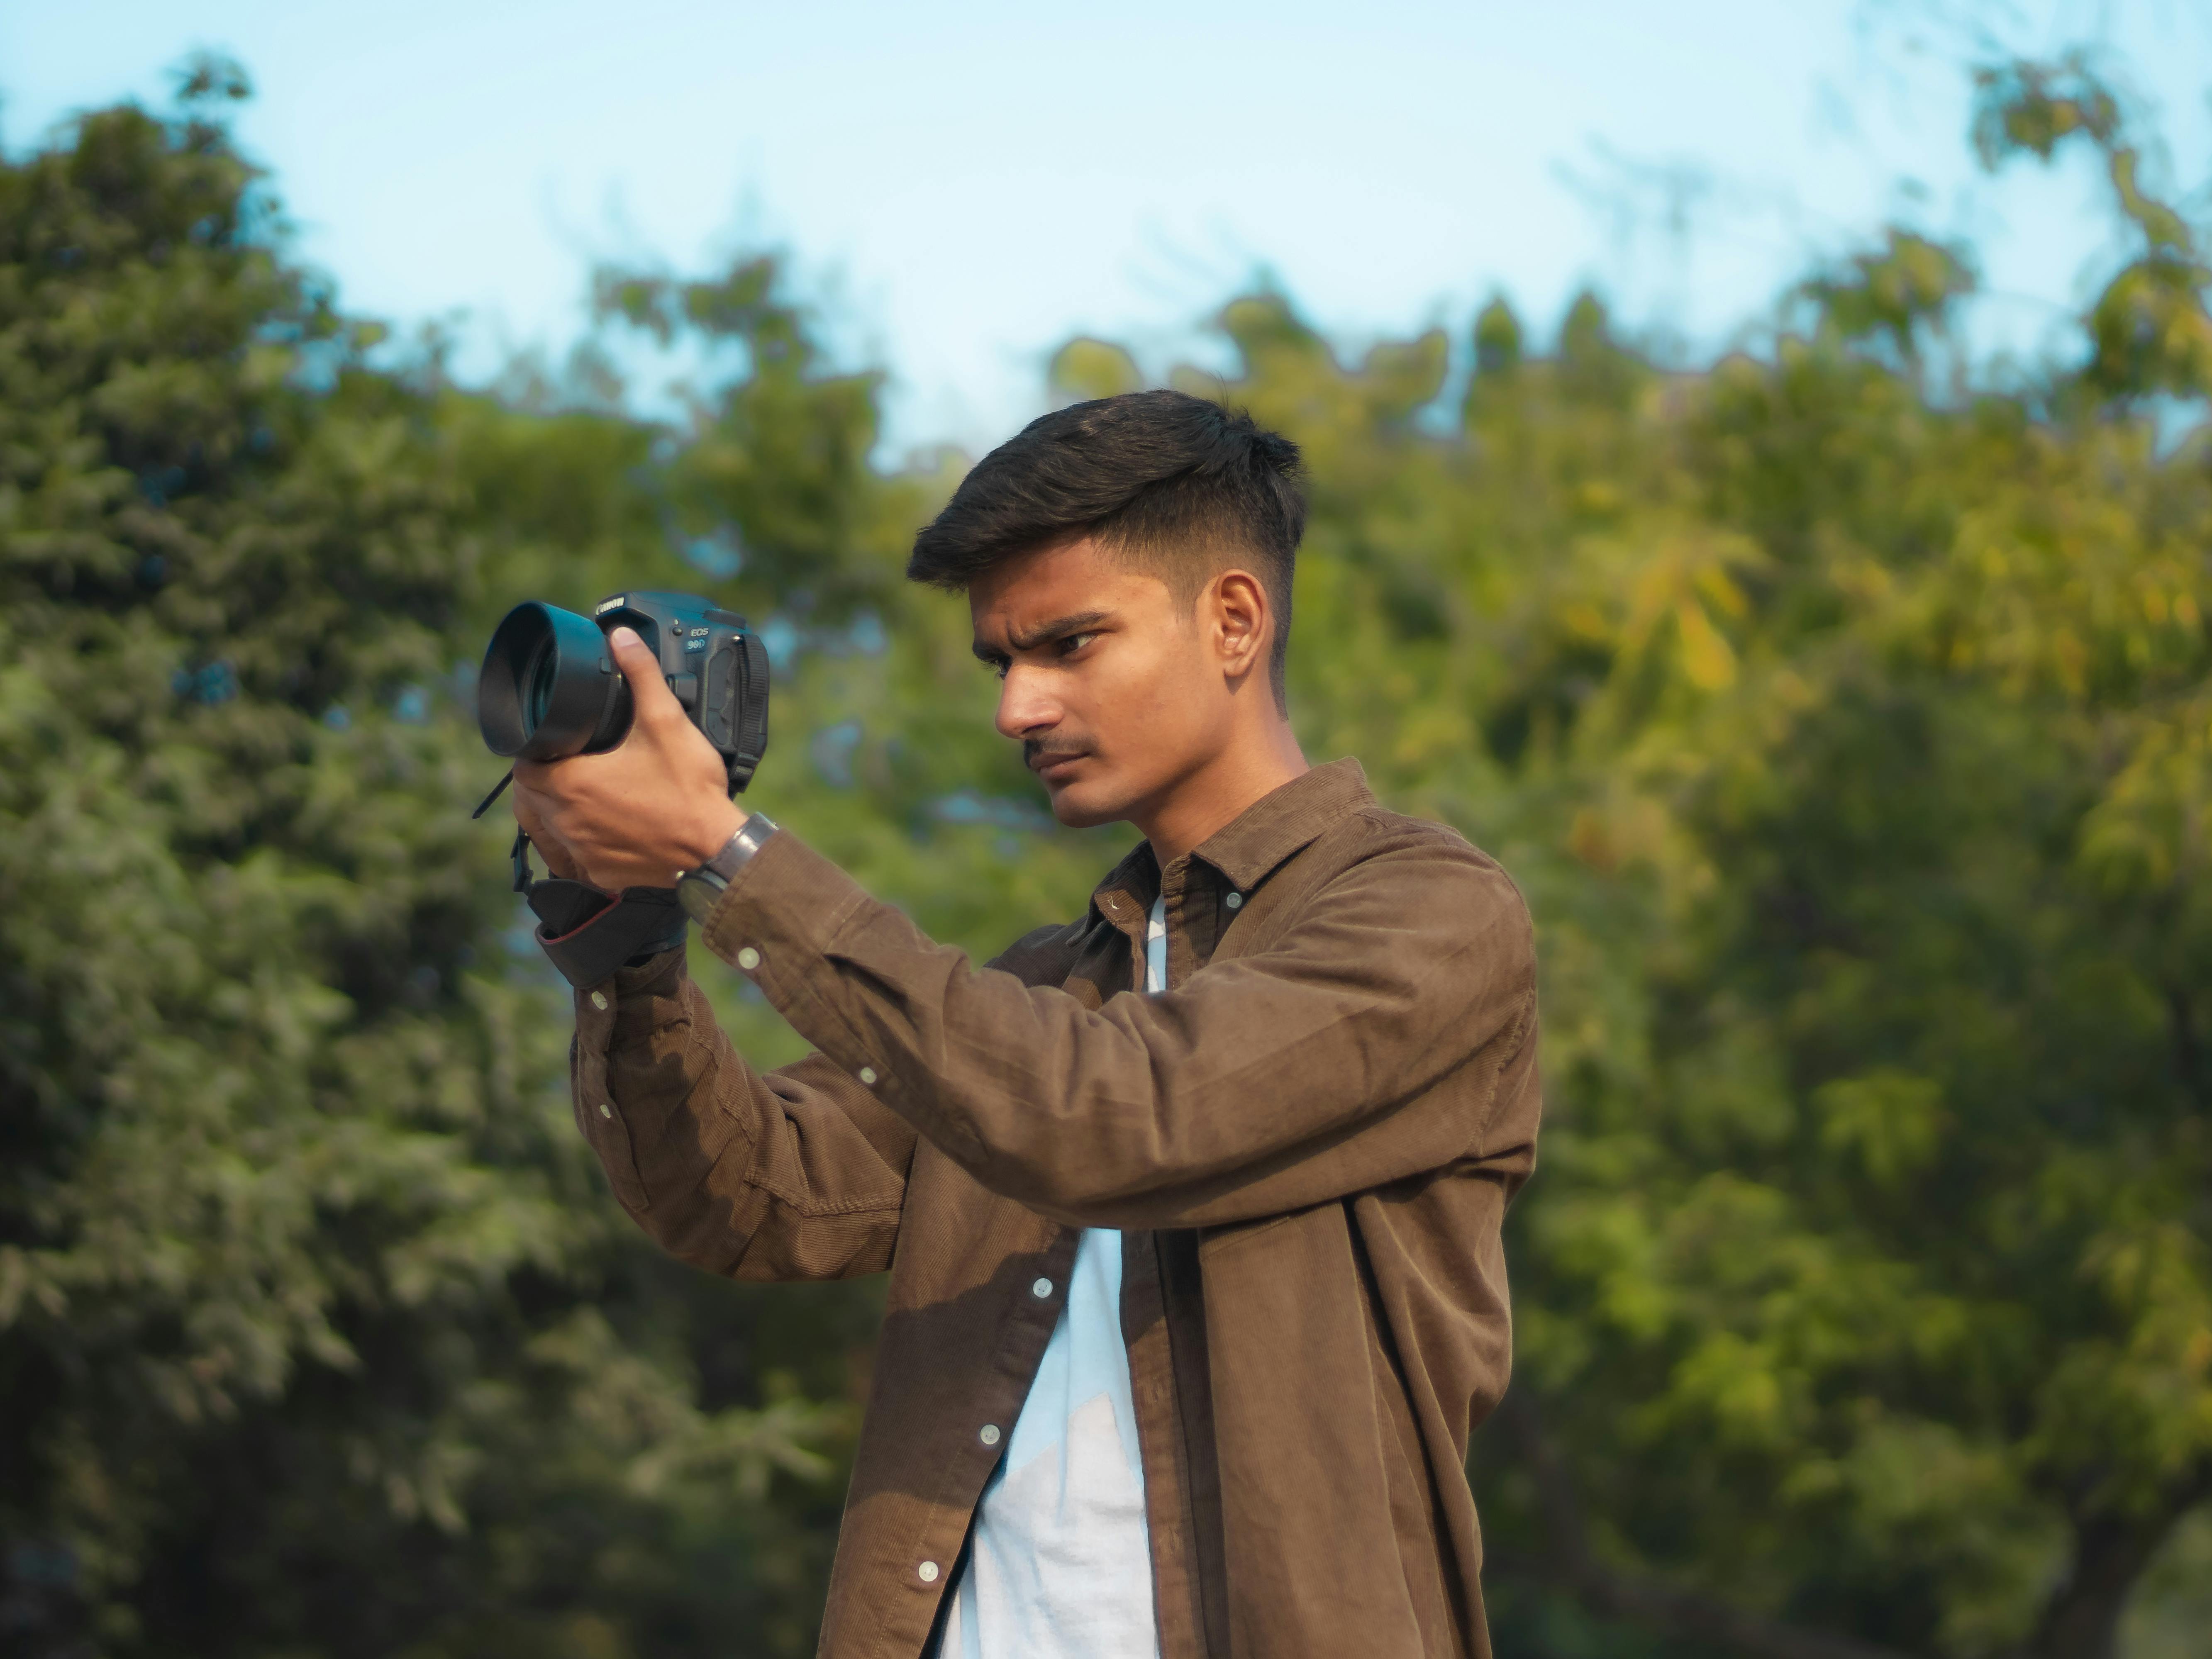 Free Photos - A Young Boy Standing In Front Of A Brown Curtain, Striking A  Pose For The Camera. He Is Wearing Casual Clothes, Including A Crop Top And  Shorts, And Is